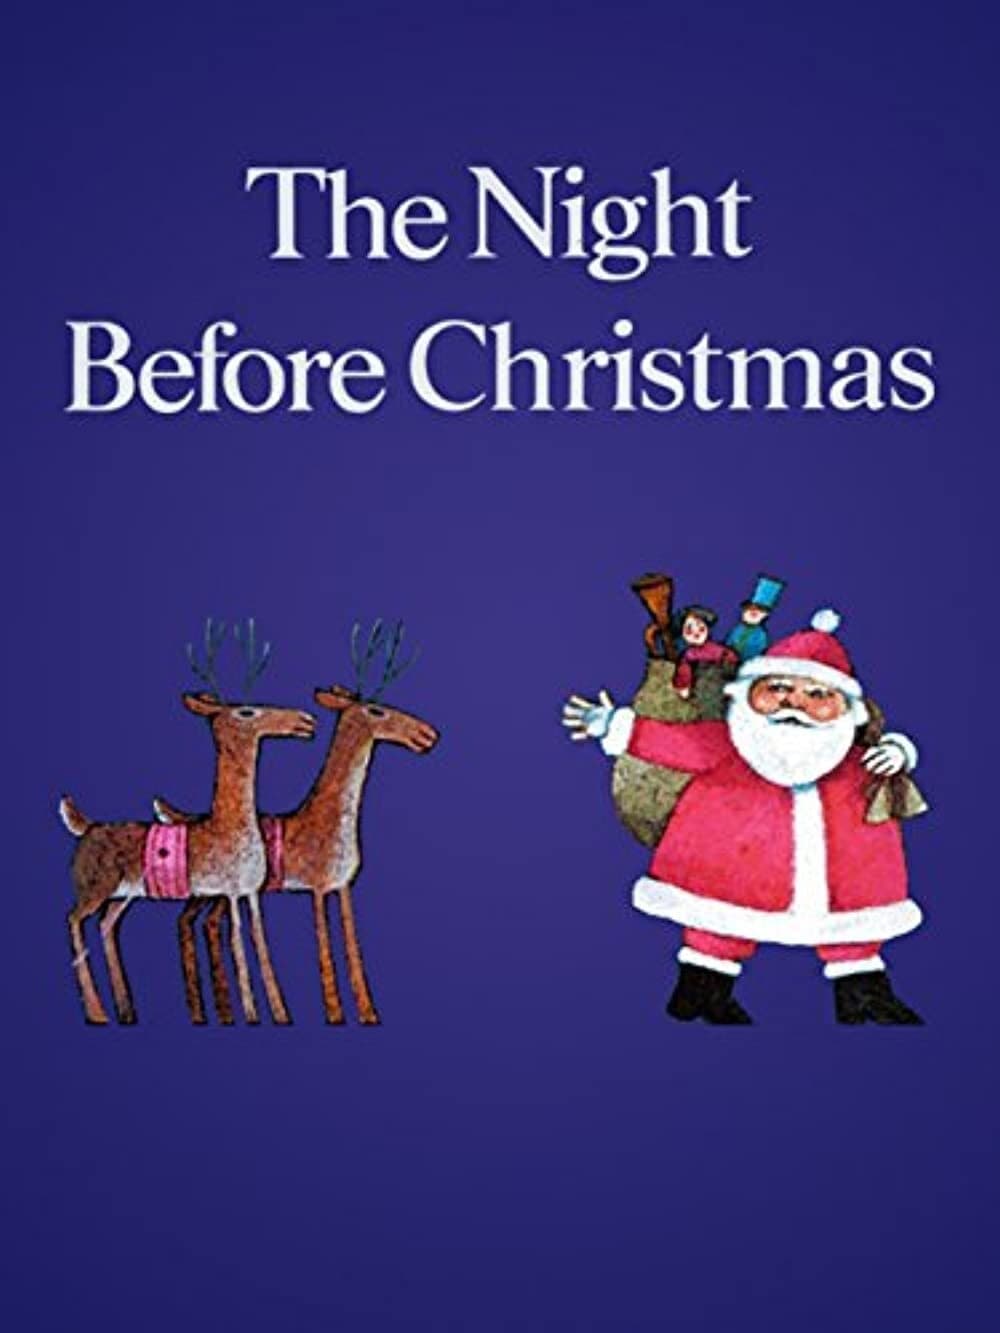 The Night Before Christmas (2013)